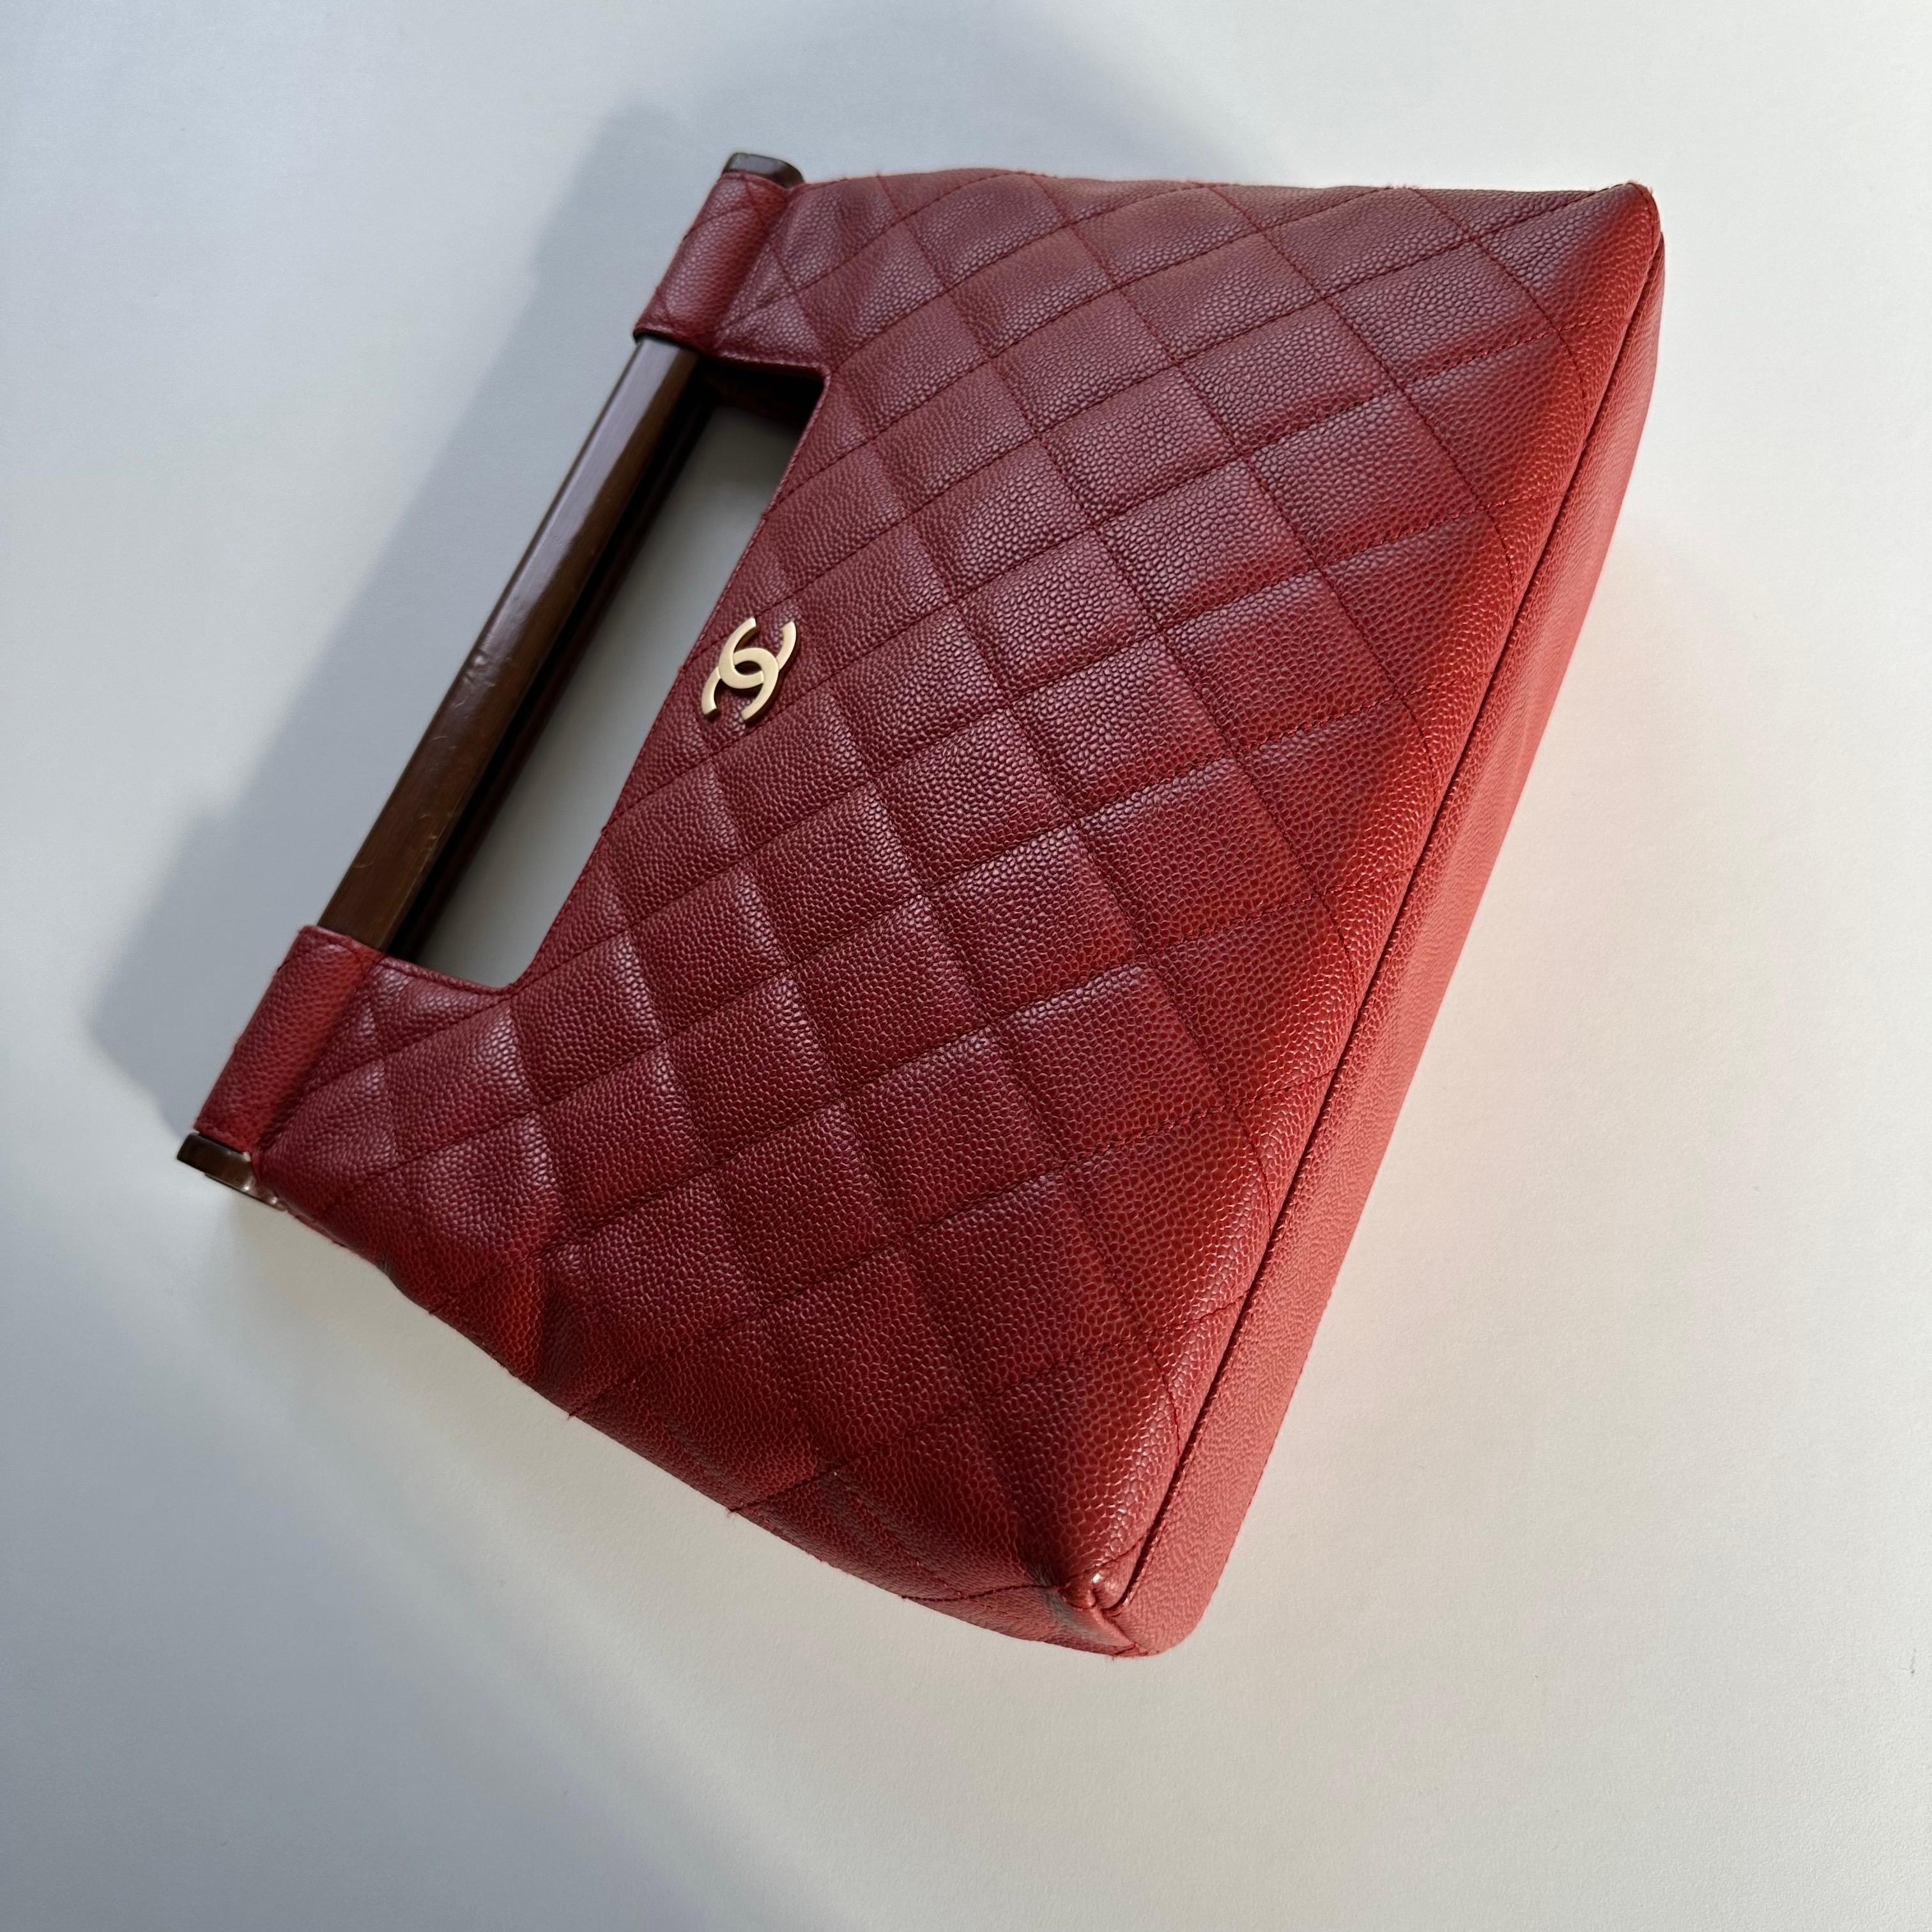 Chanel 2003 Wood Top Handle Rare Red Caviar Jumbo Kelly Envelope Clutch Tote Bag For Sale 4